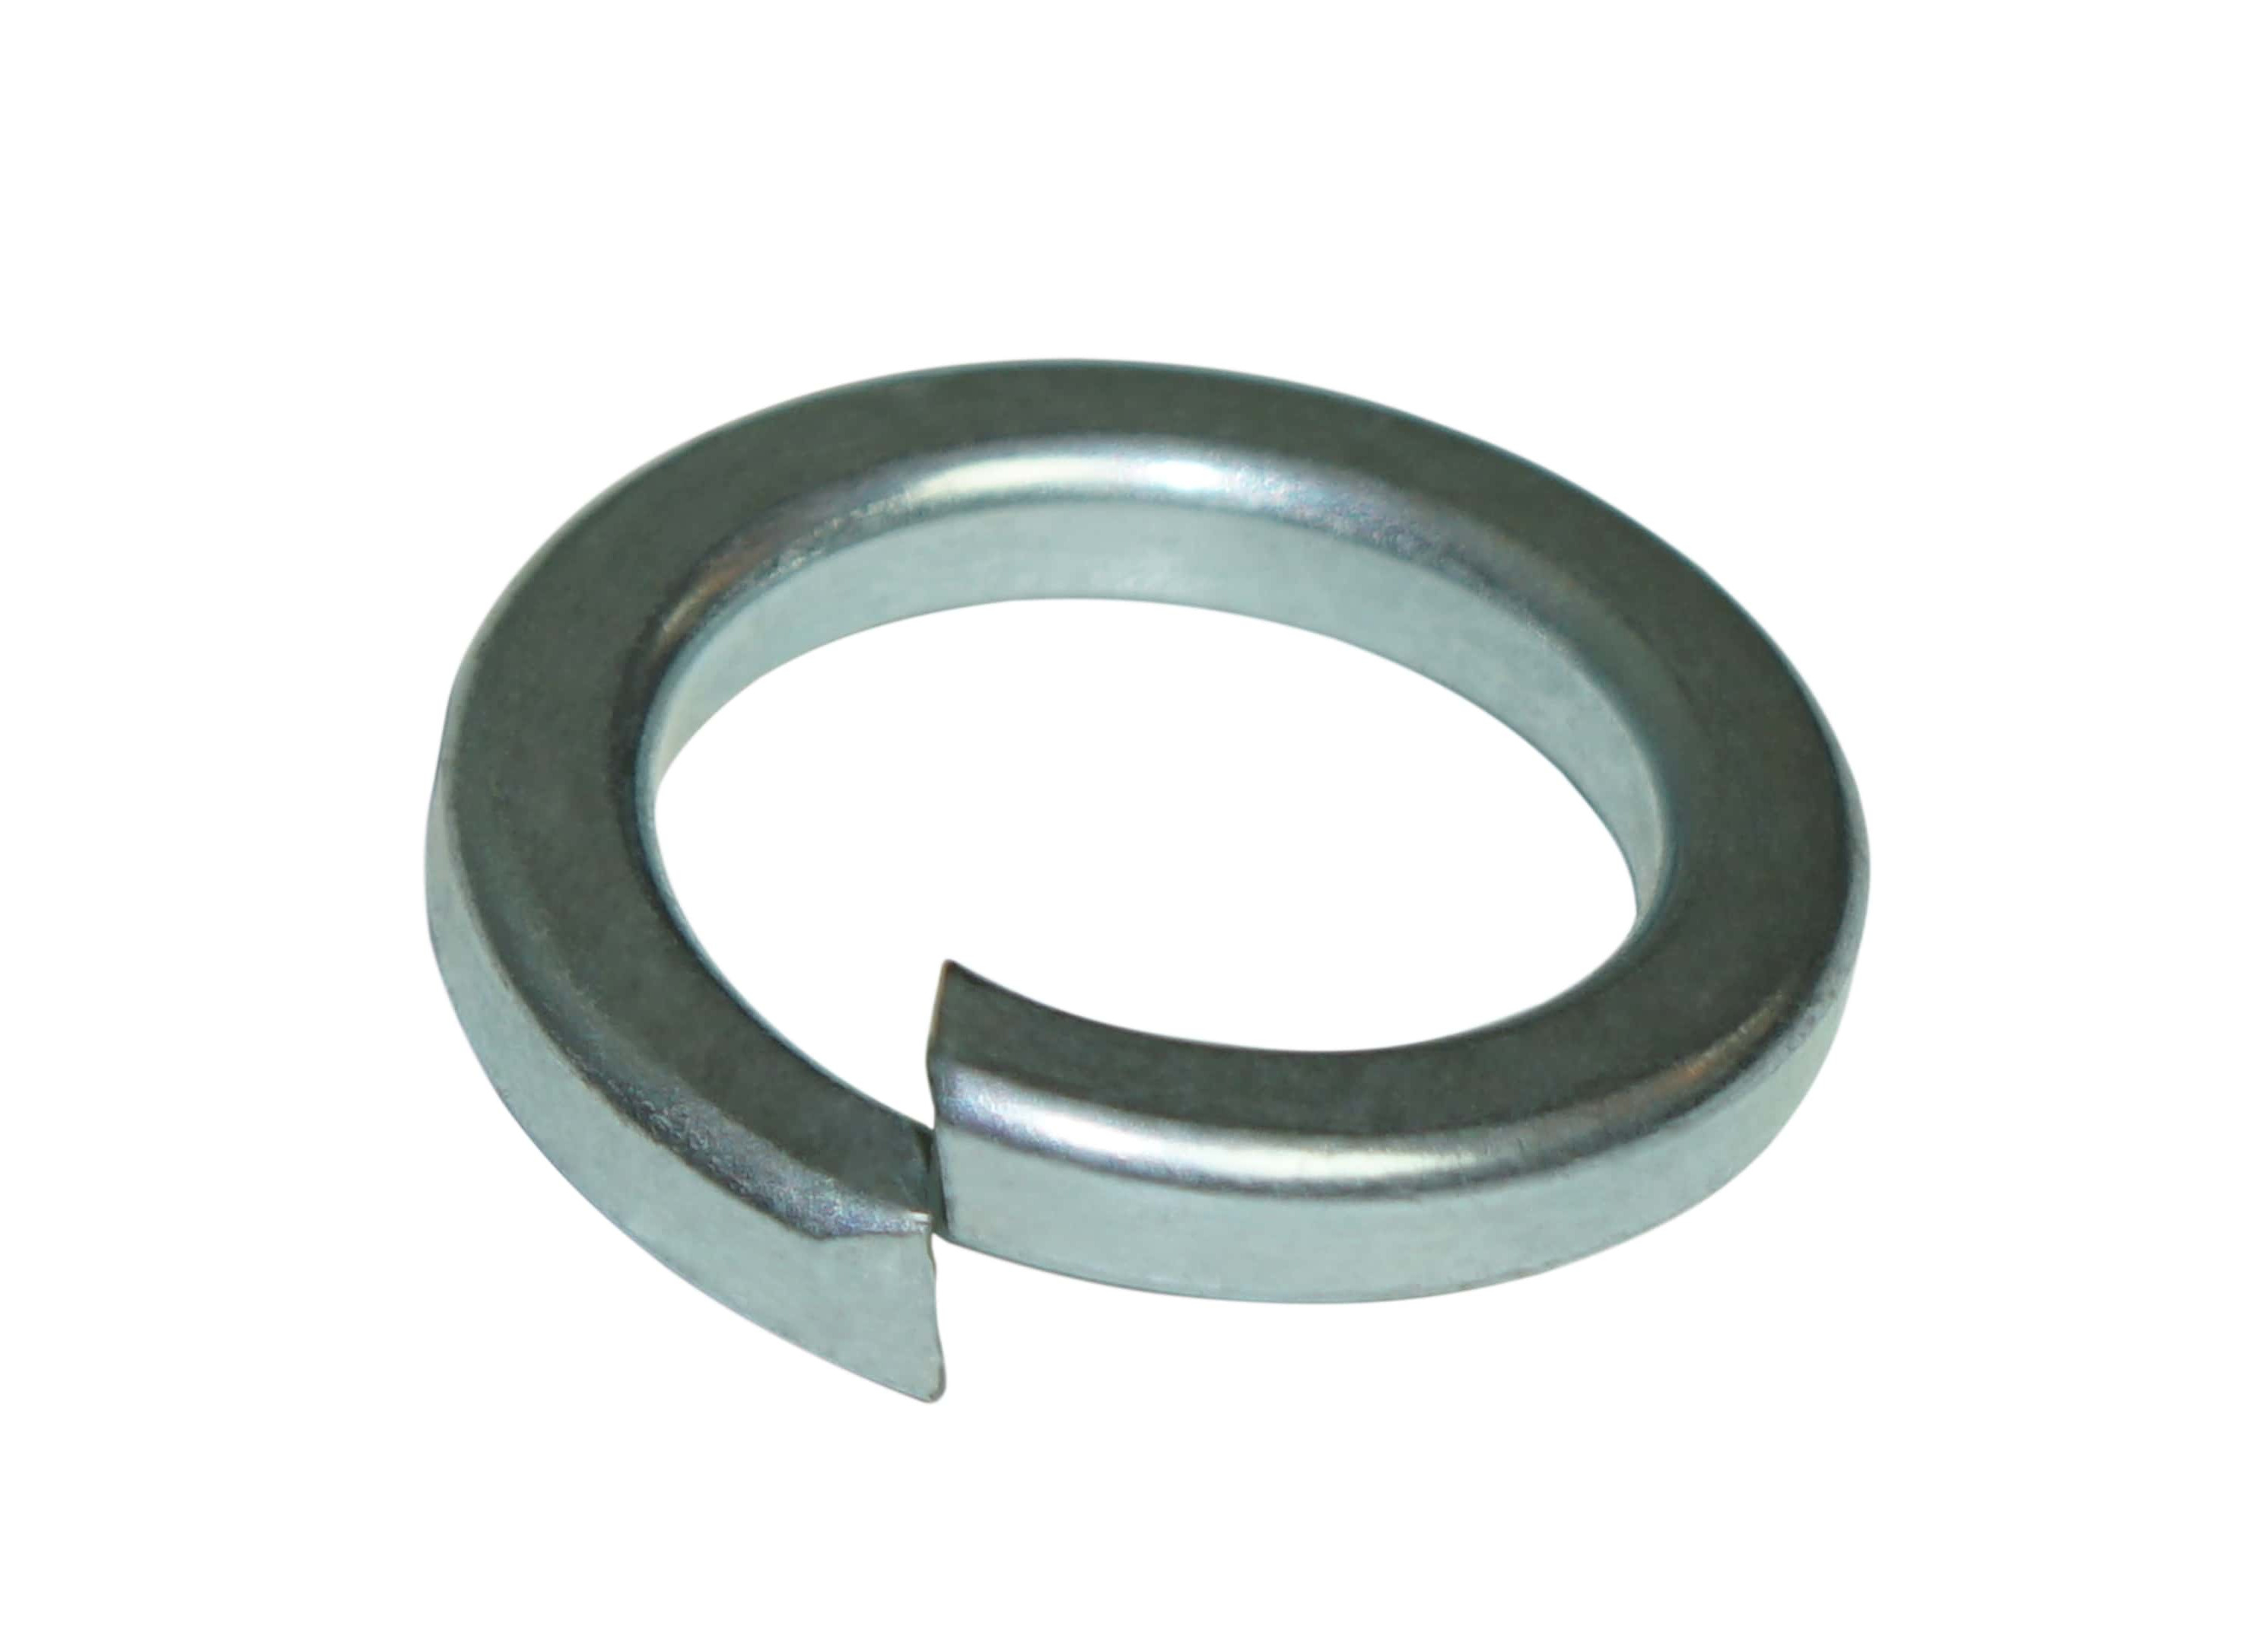 BZP Spring Washers - Square Section